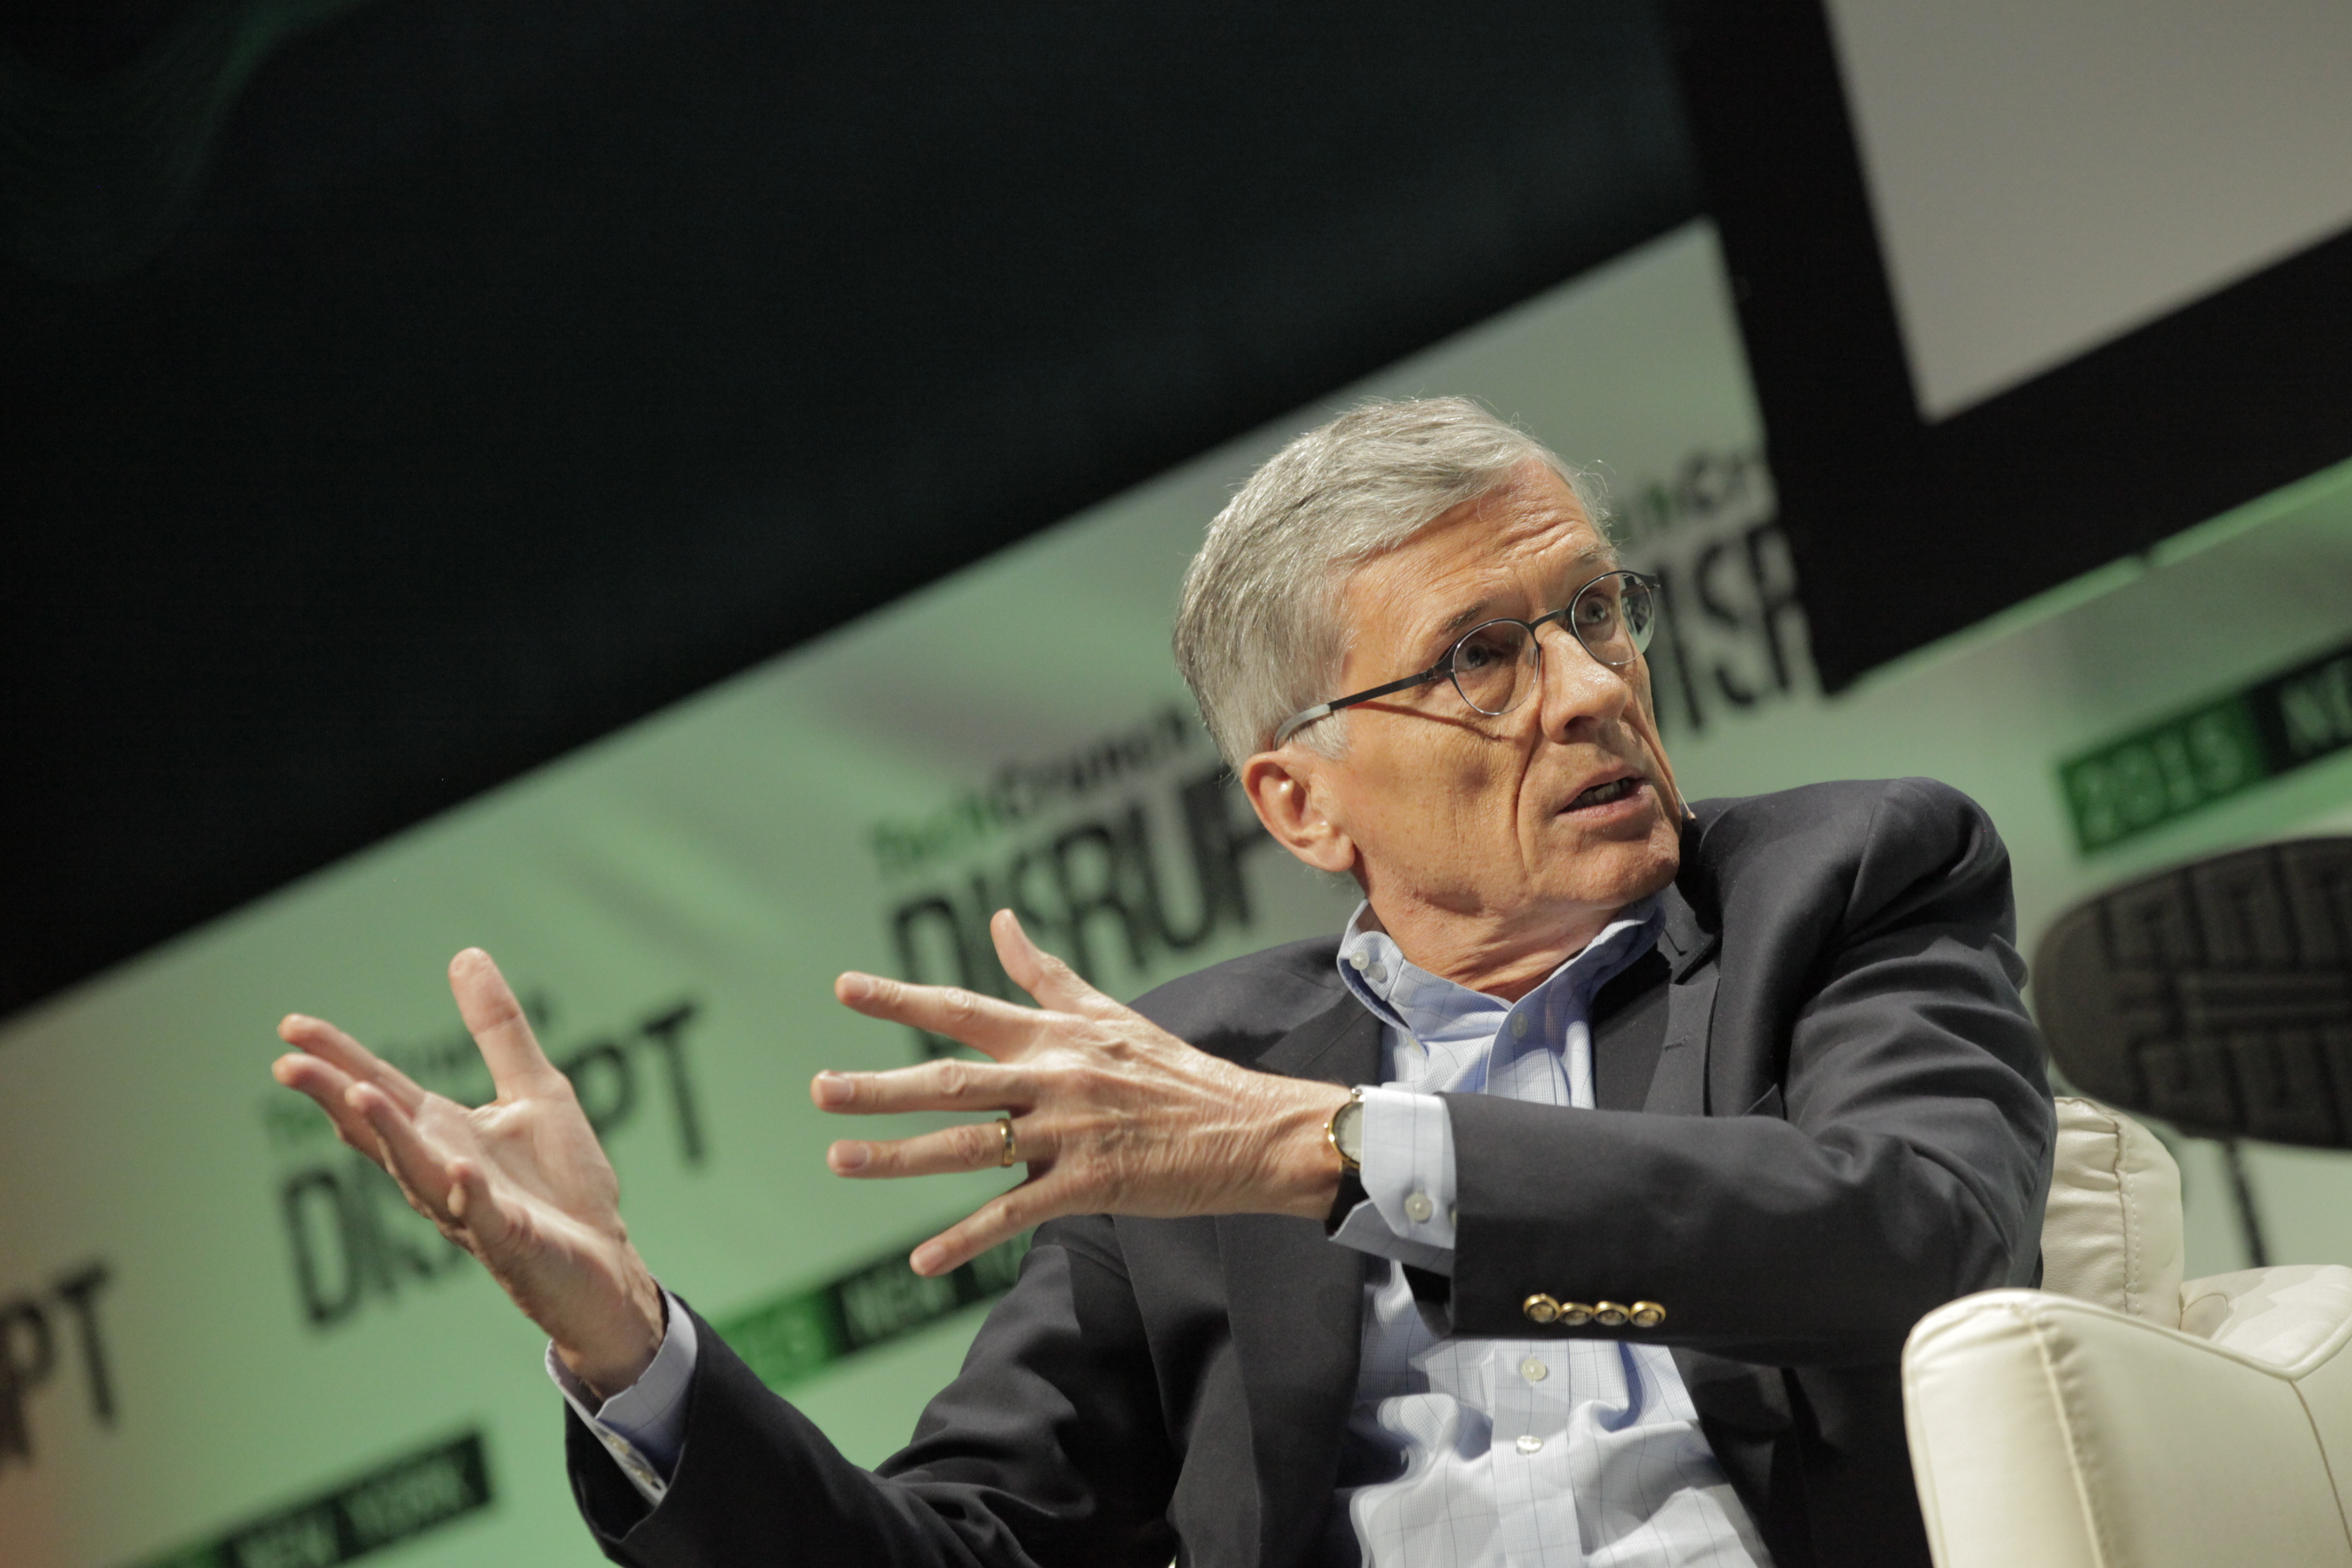 FCC Chairman Tom Wheeler at Disrupt in 2015.